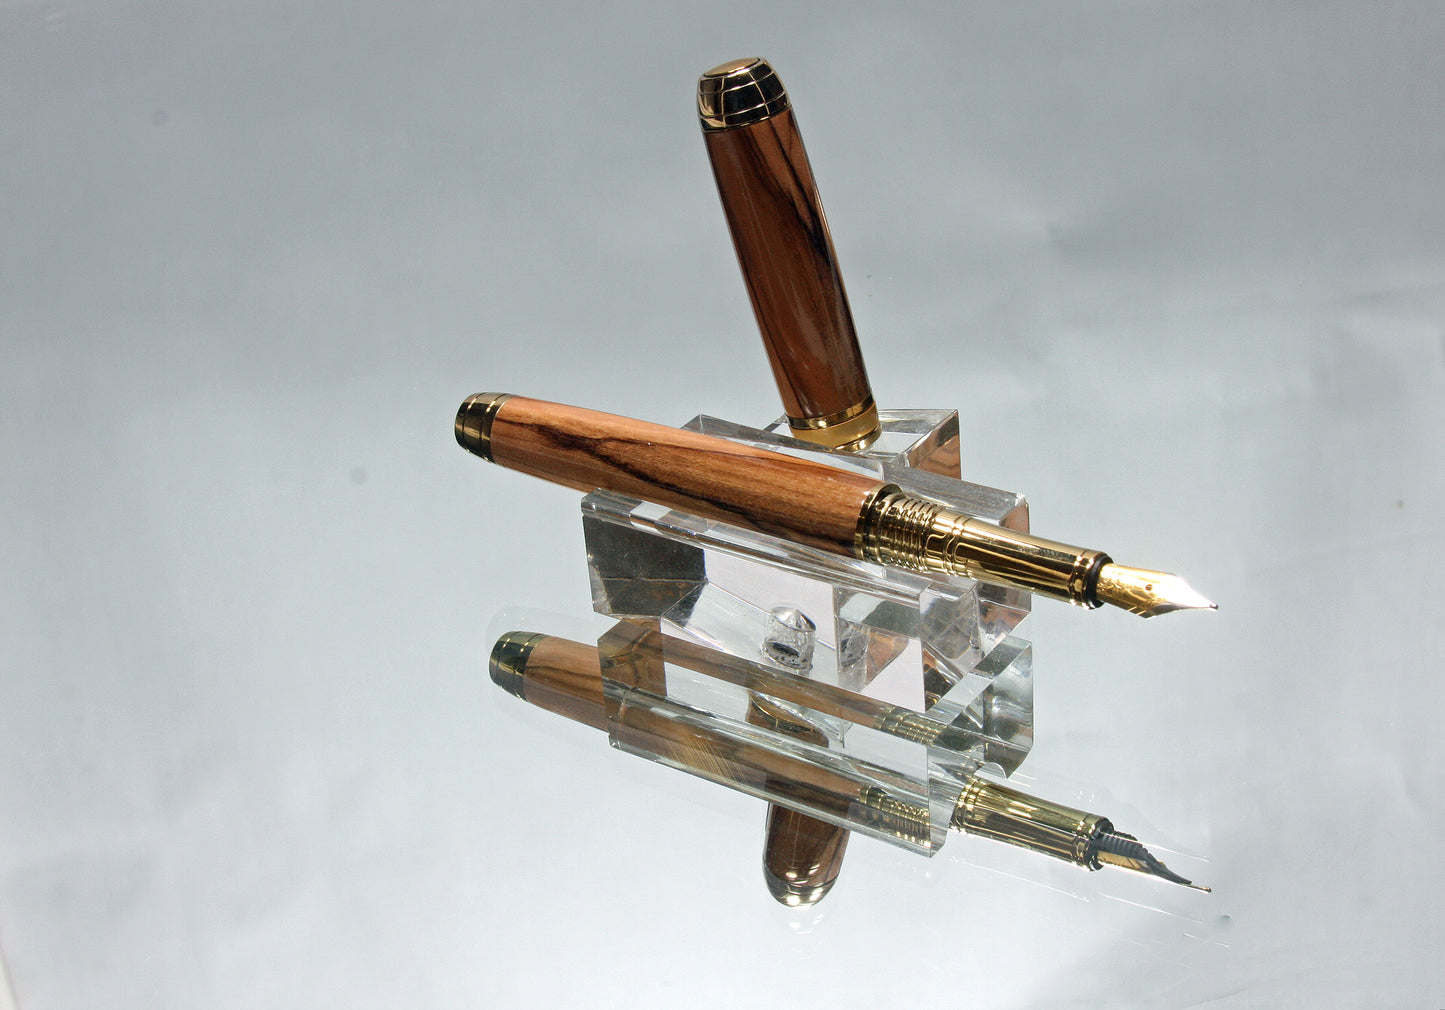 Handcrafted Olive Wood Fountain Pen – Classic British Style, Titanium Gold Plated